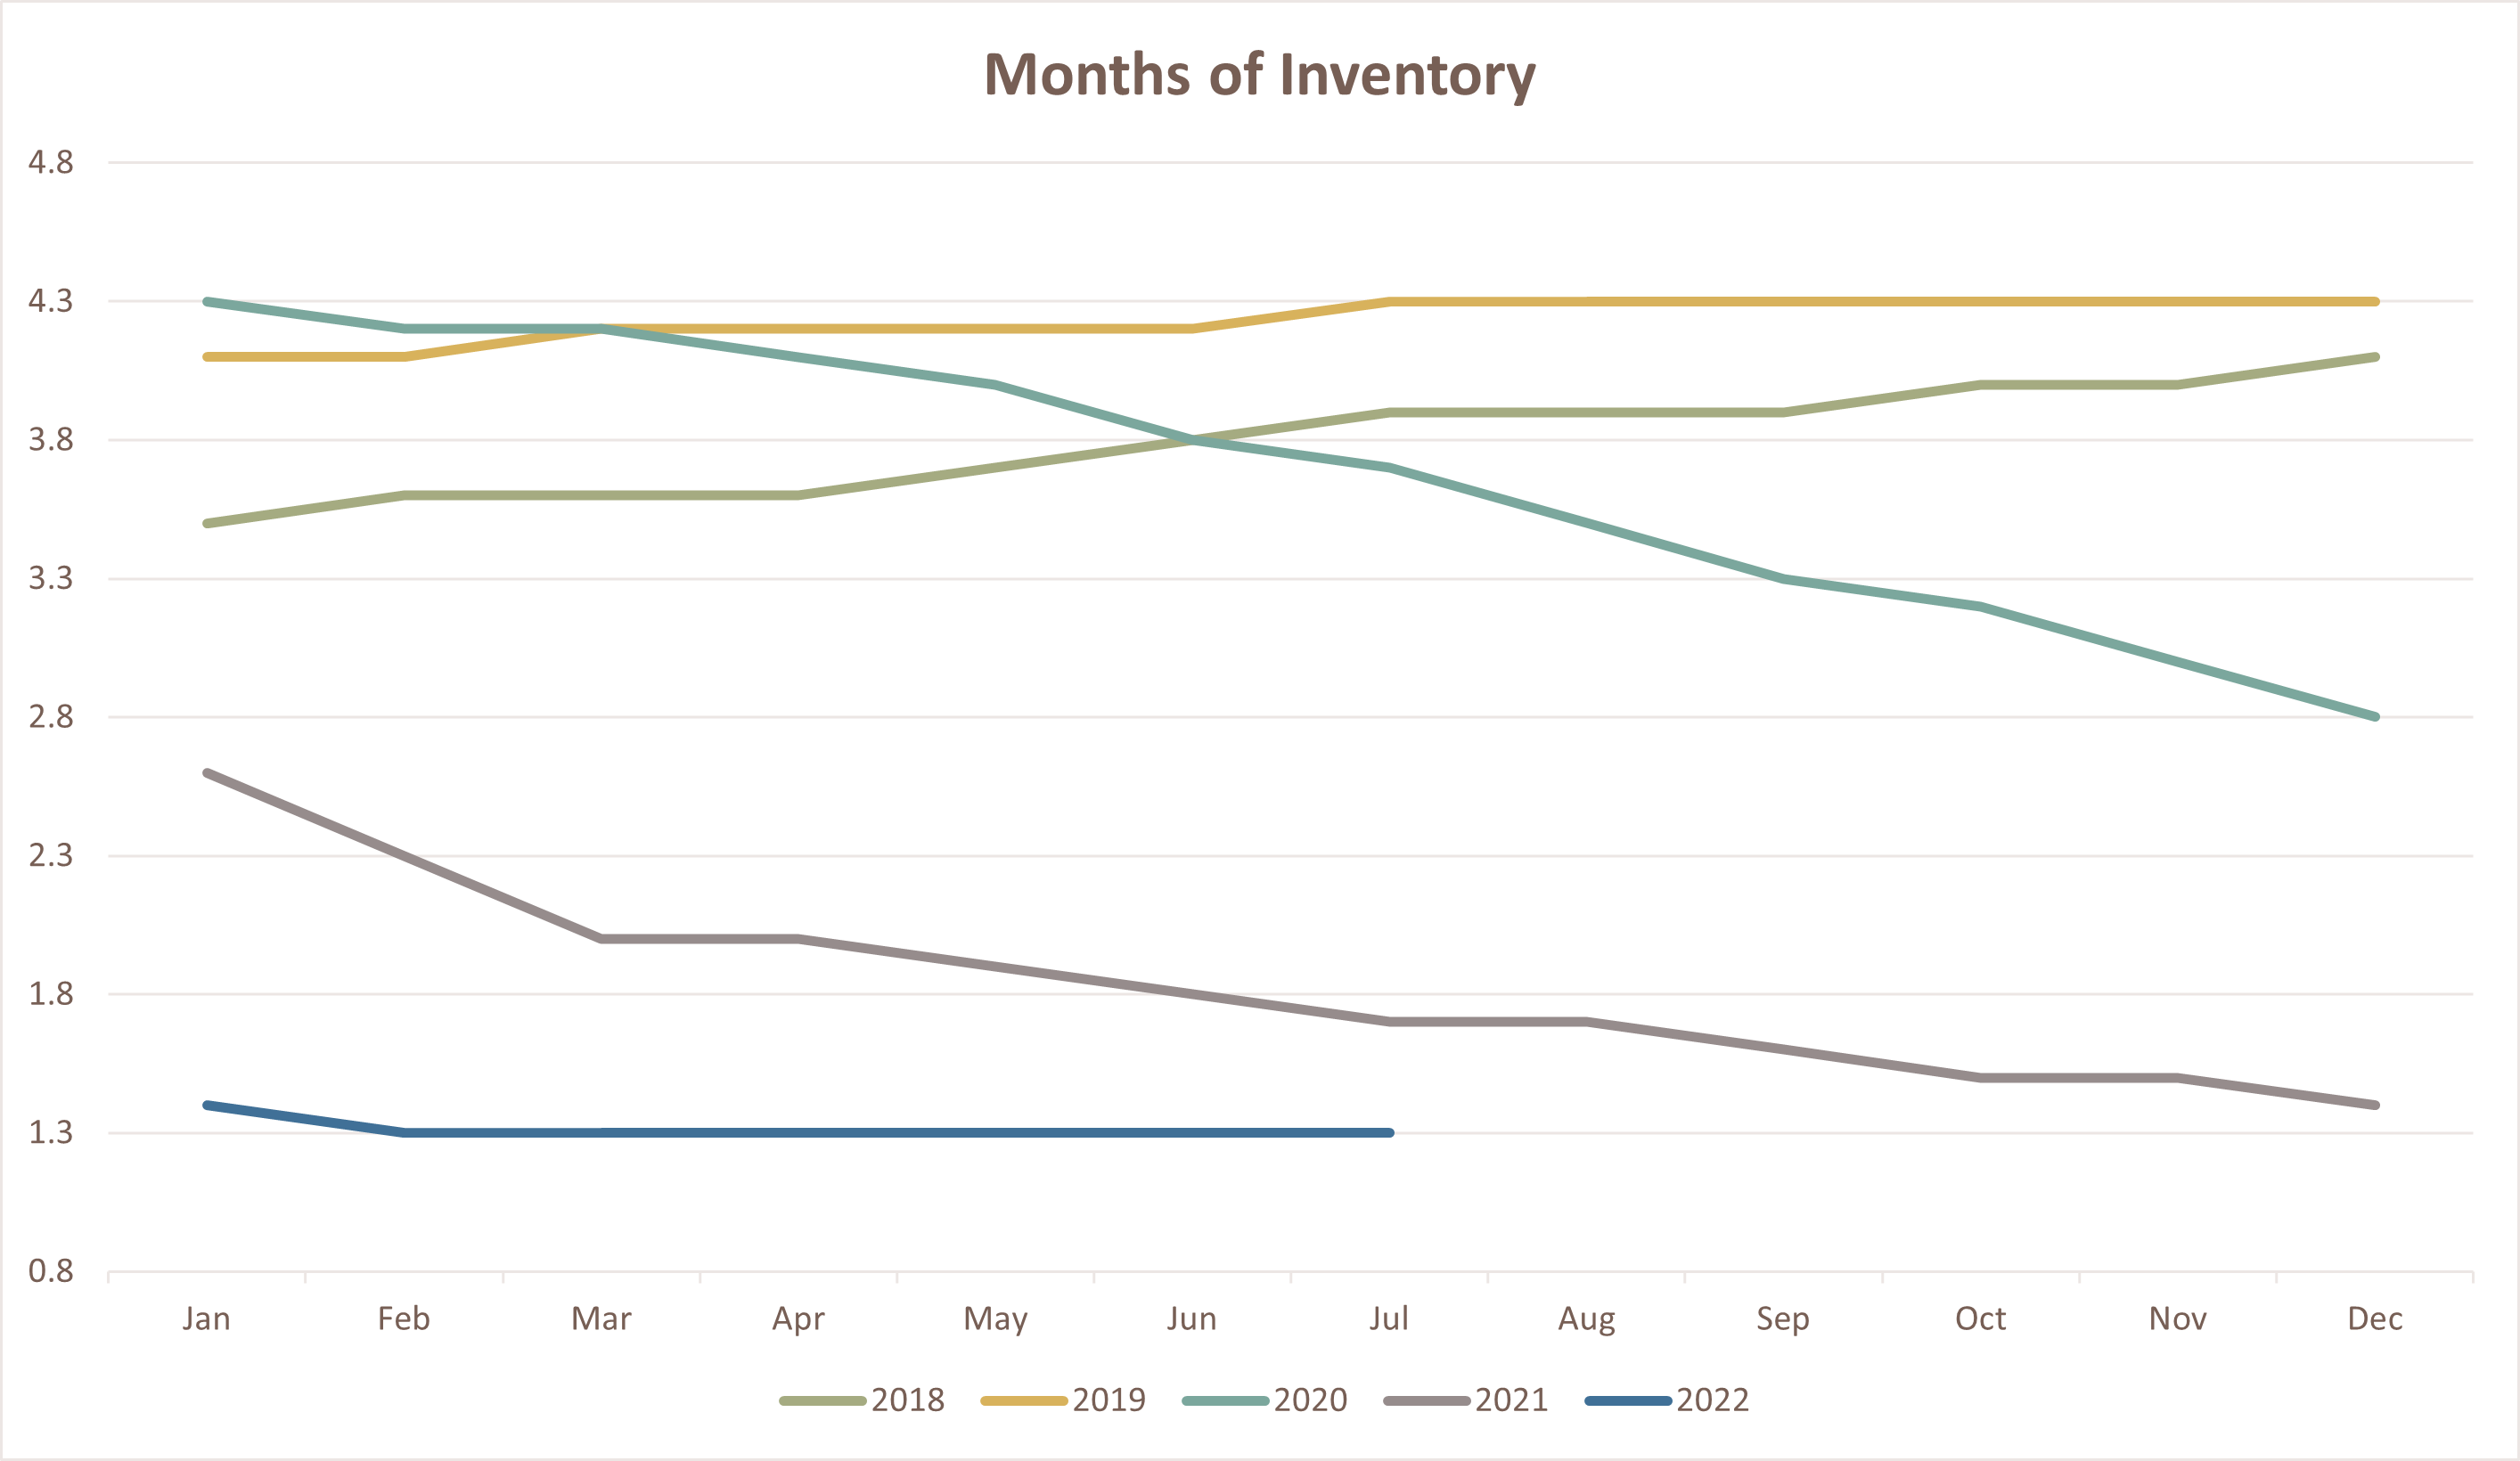 Months of Inventory